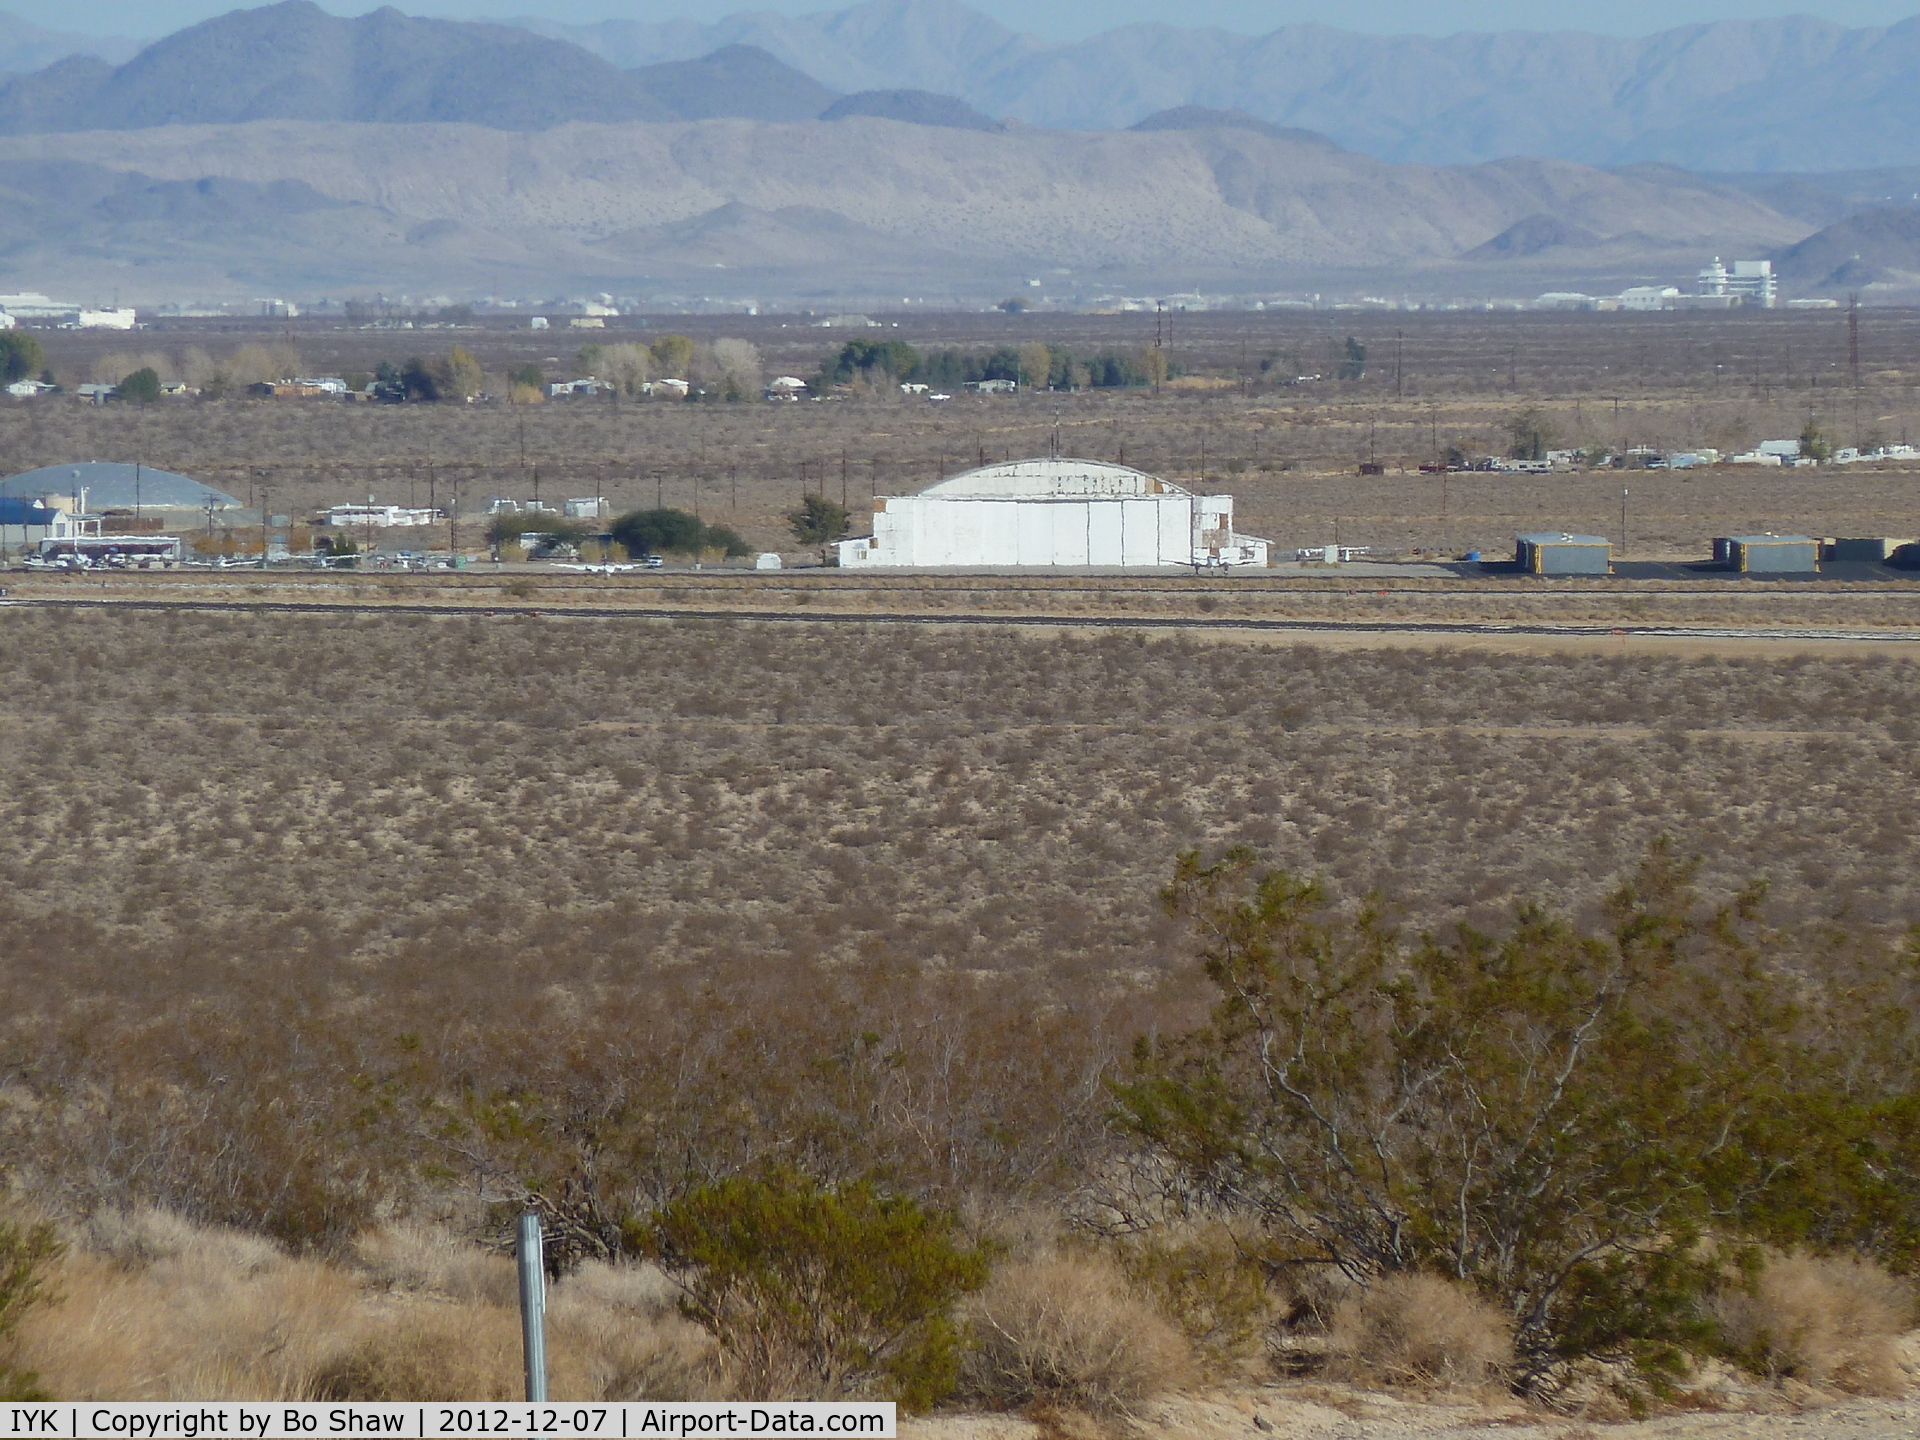 Inyokern Airport (IYK) - The large white building in the center of the picture is the 